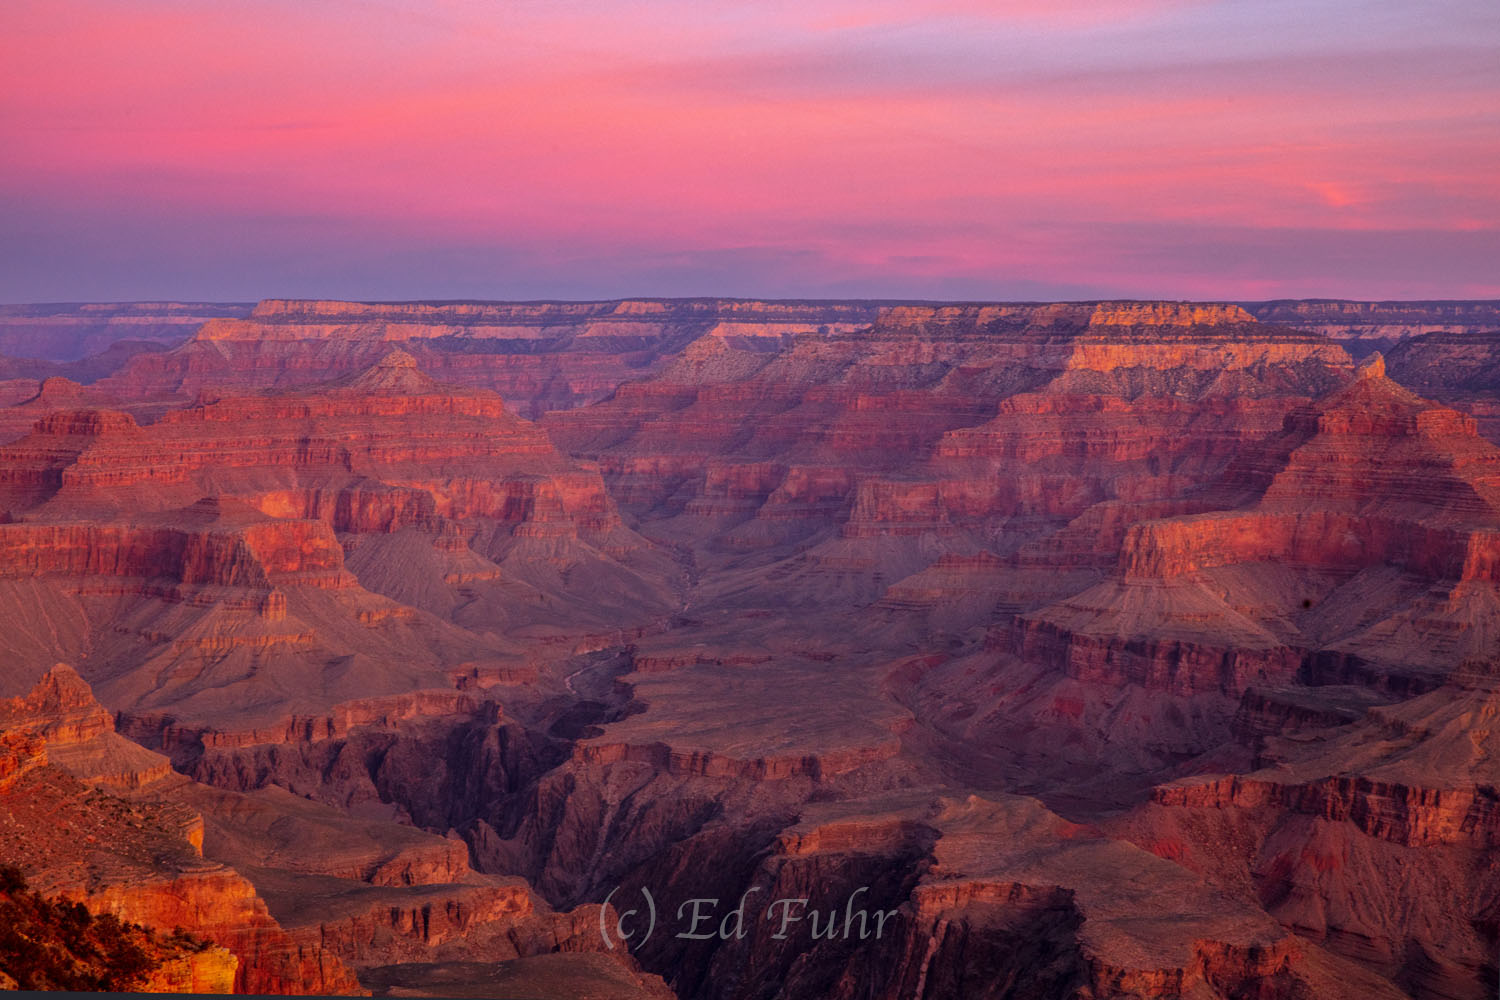 As the sun sets, the Grand Canyon turns an amazing array of yellows, pinks, oranges and reds in what is truly one of the greatest...